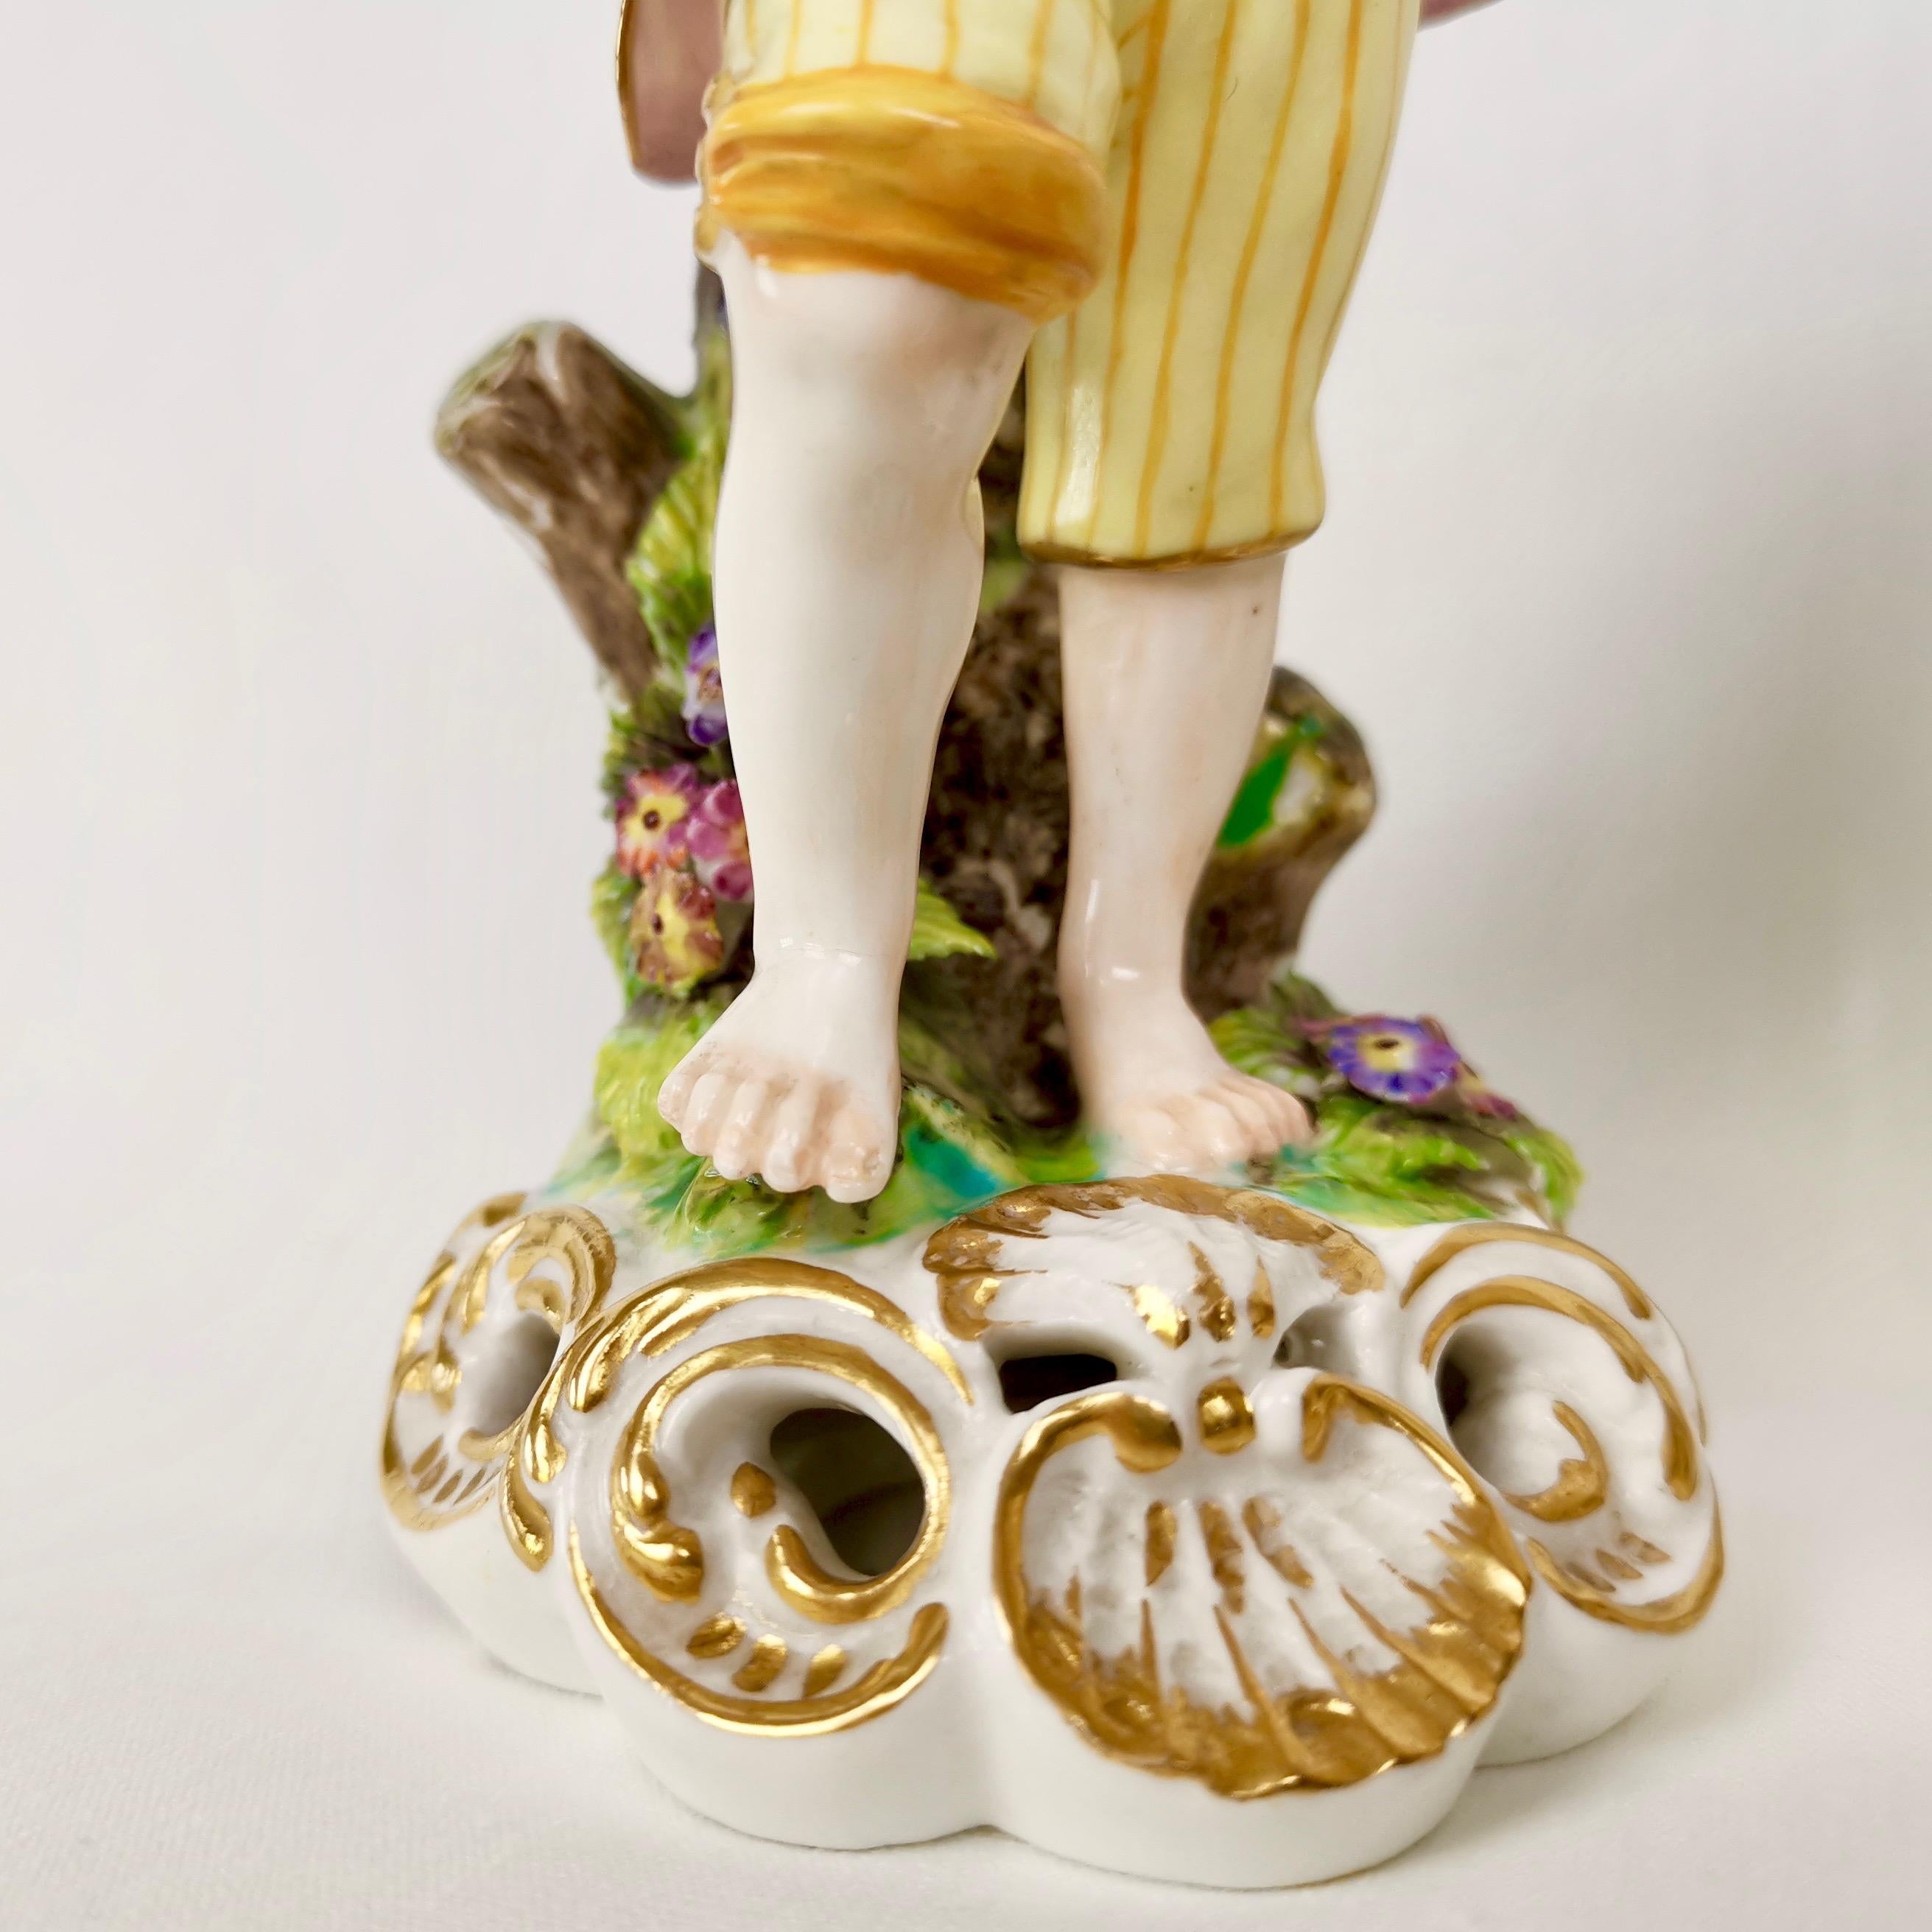 Derby King Street Porcelain Boy and Girl Playing with Dog and Lamb, circa 1915 For Sale 3